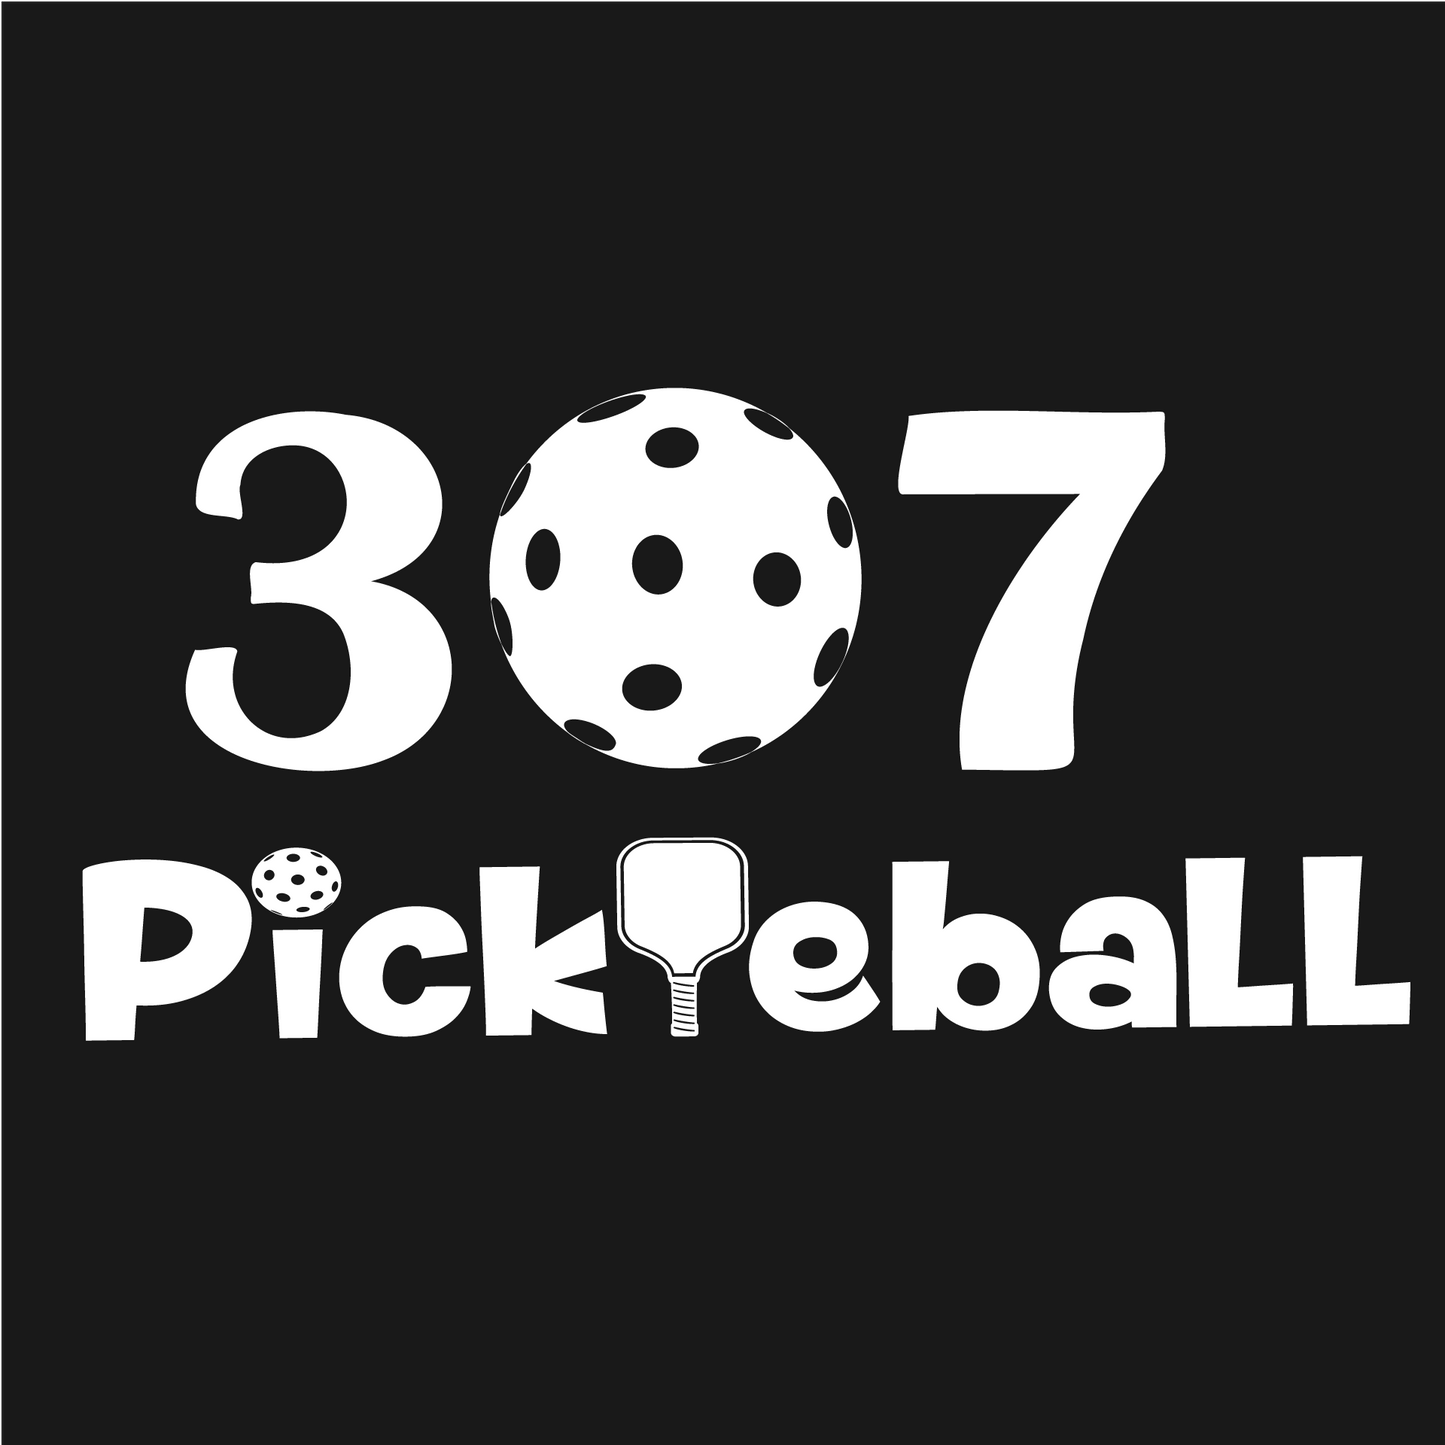 307 Wyoming Pickleball Club | Women's Long Sleeve Scoop Neck Pickleball Shirts | 75/13/12 poly/cotton/rayon